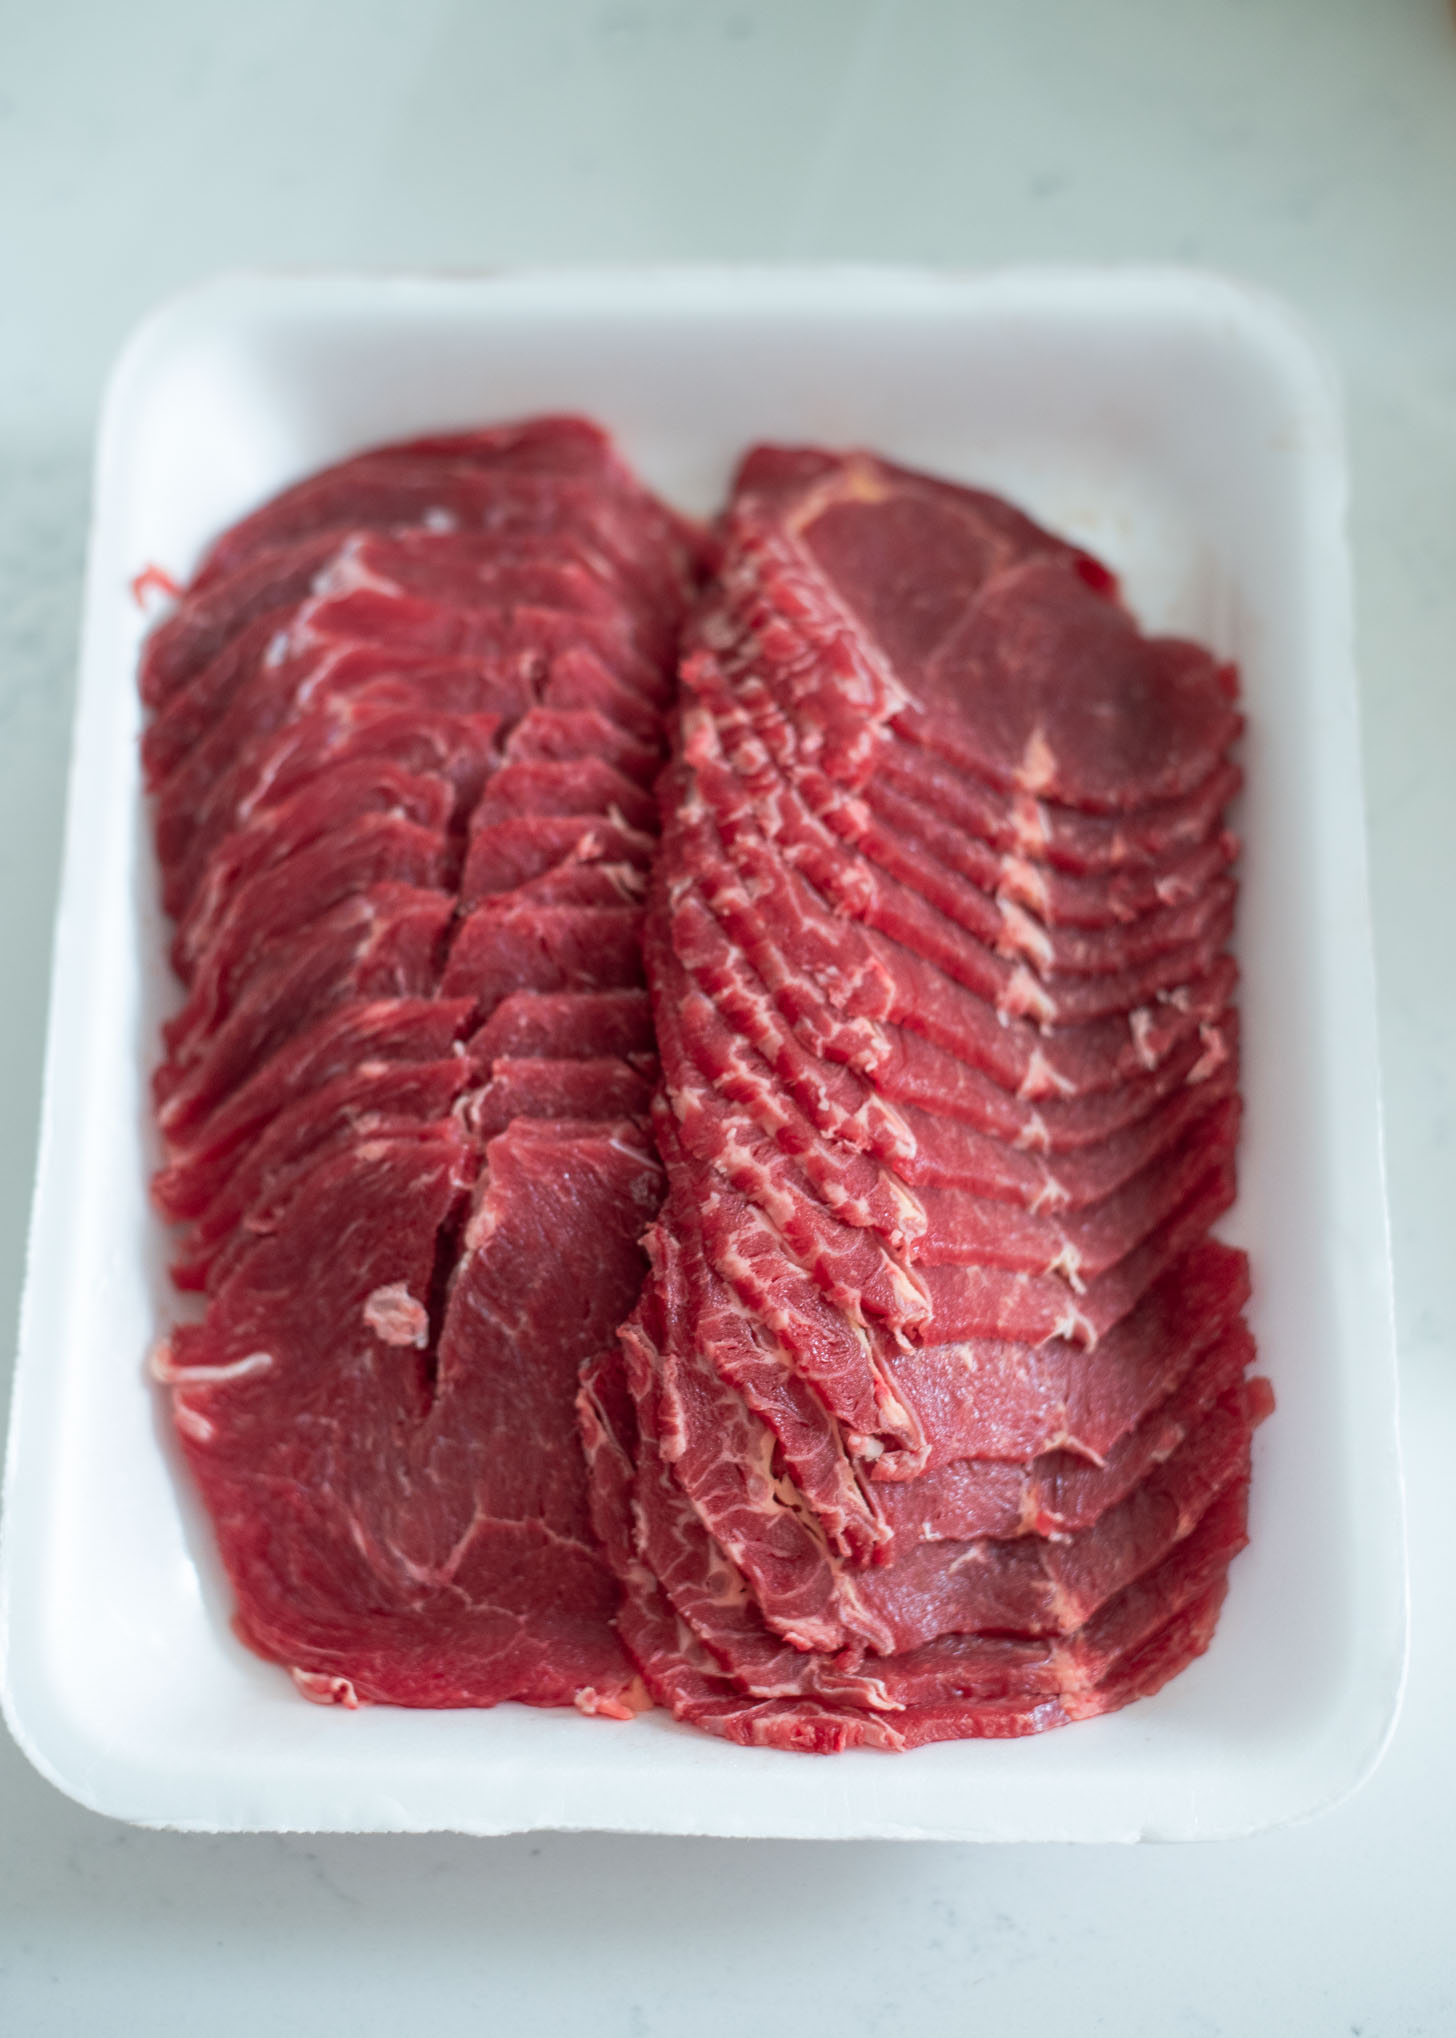 Thinly sliced beef are for making Korean beef BBQ (bulgogi)